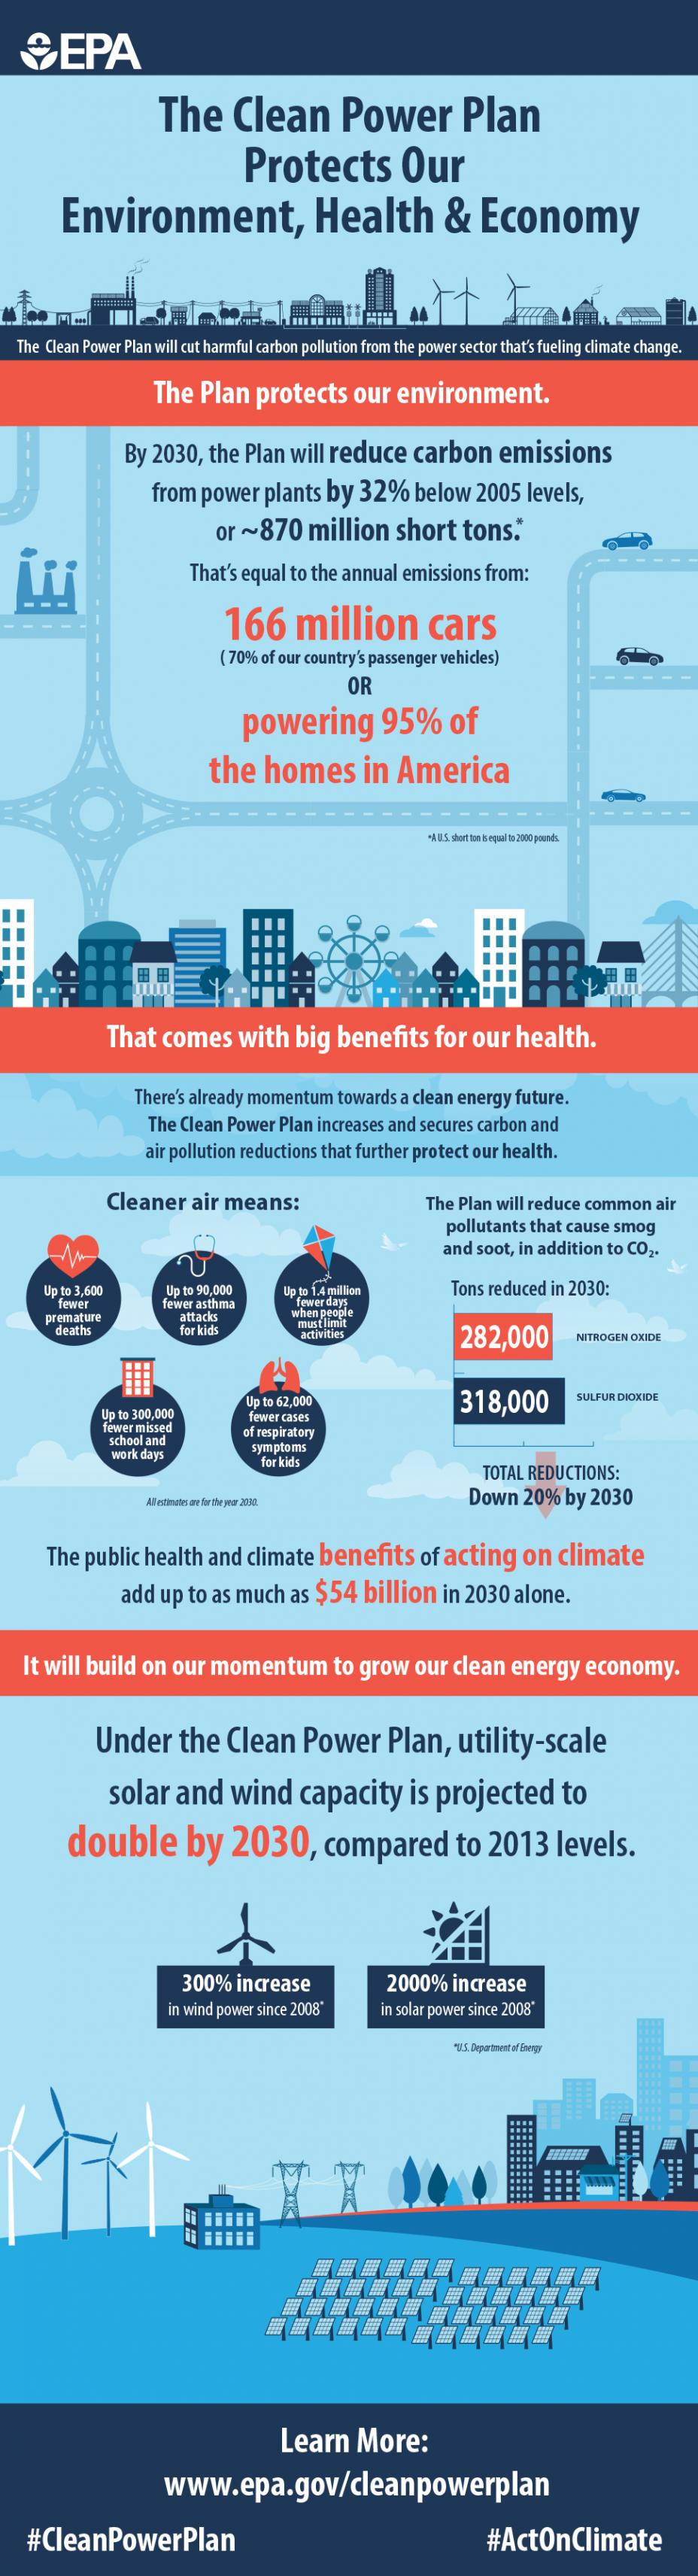 Infographic explaining the benefits of the Clean Power Plan